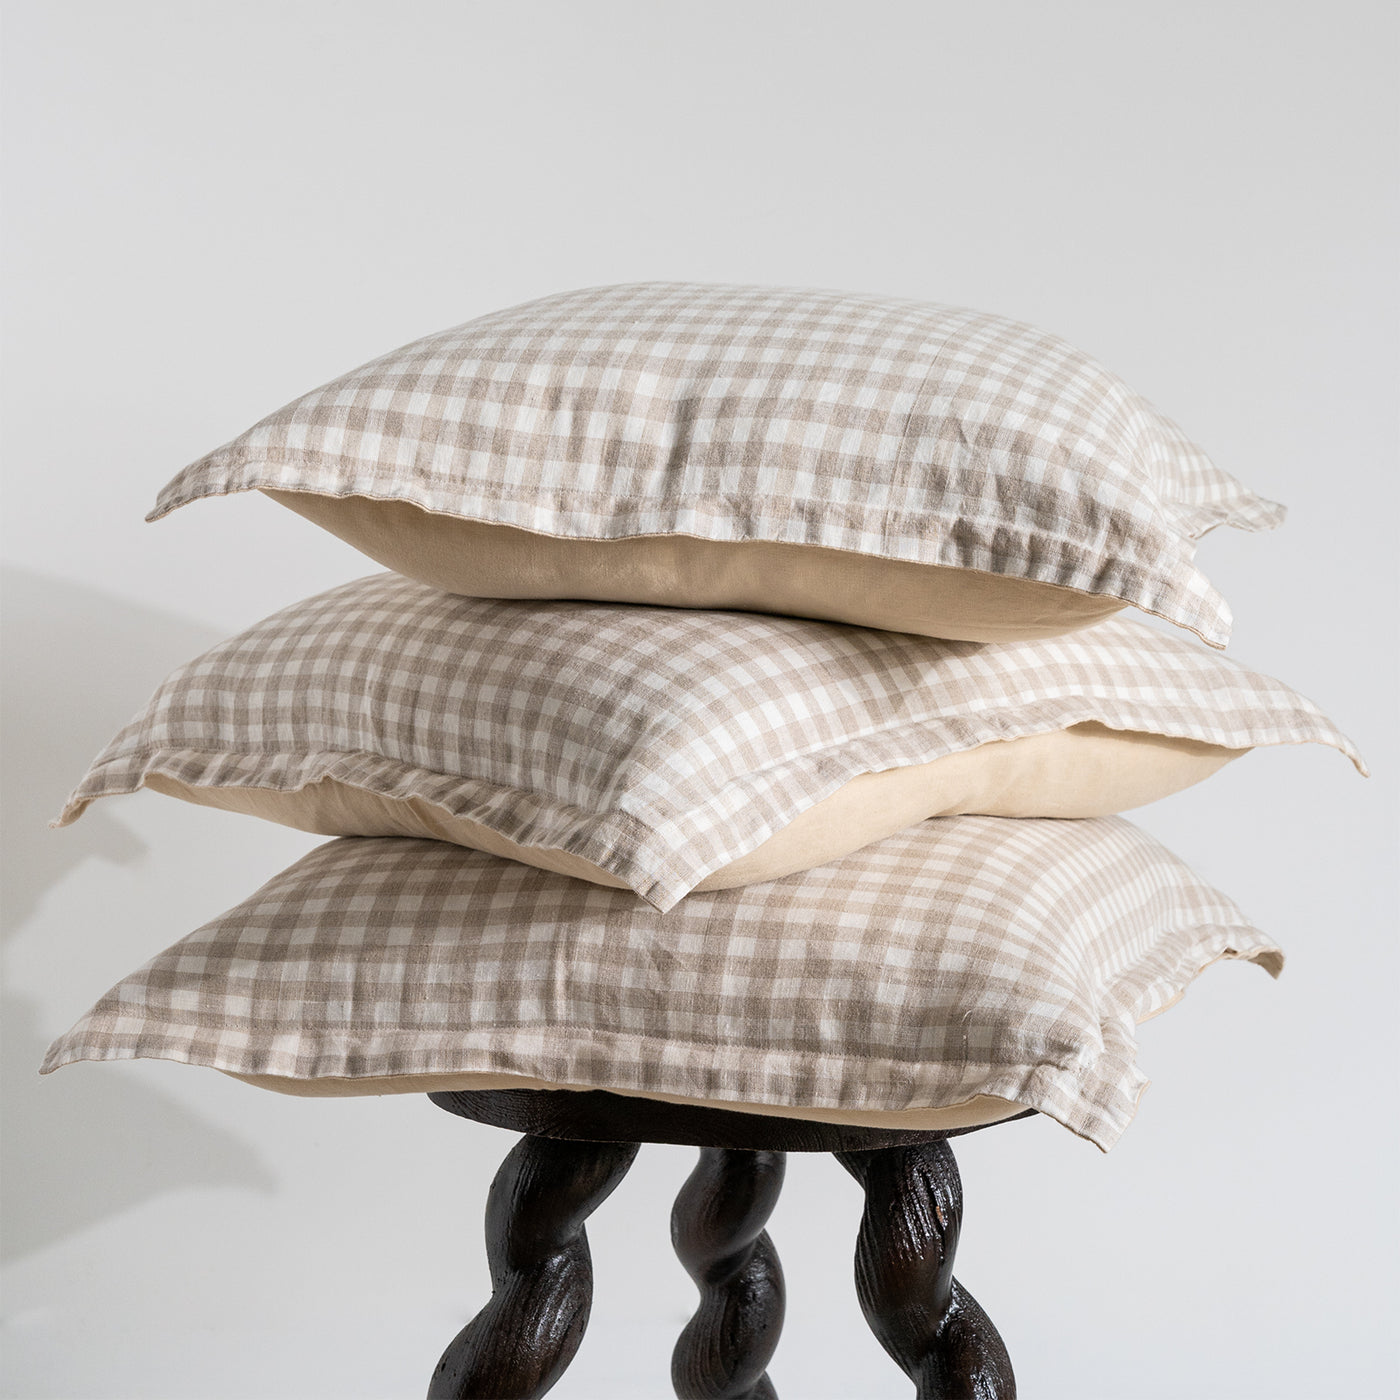 French Flax Linen Double Sided Cushion Cover in Creme/Beige Gingham